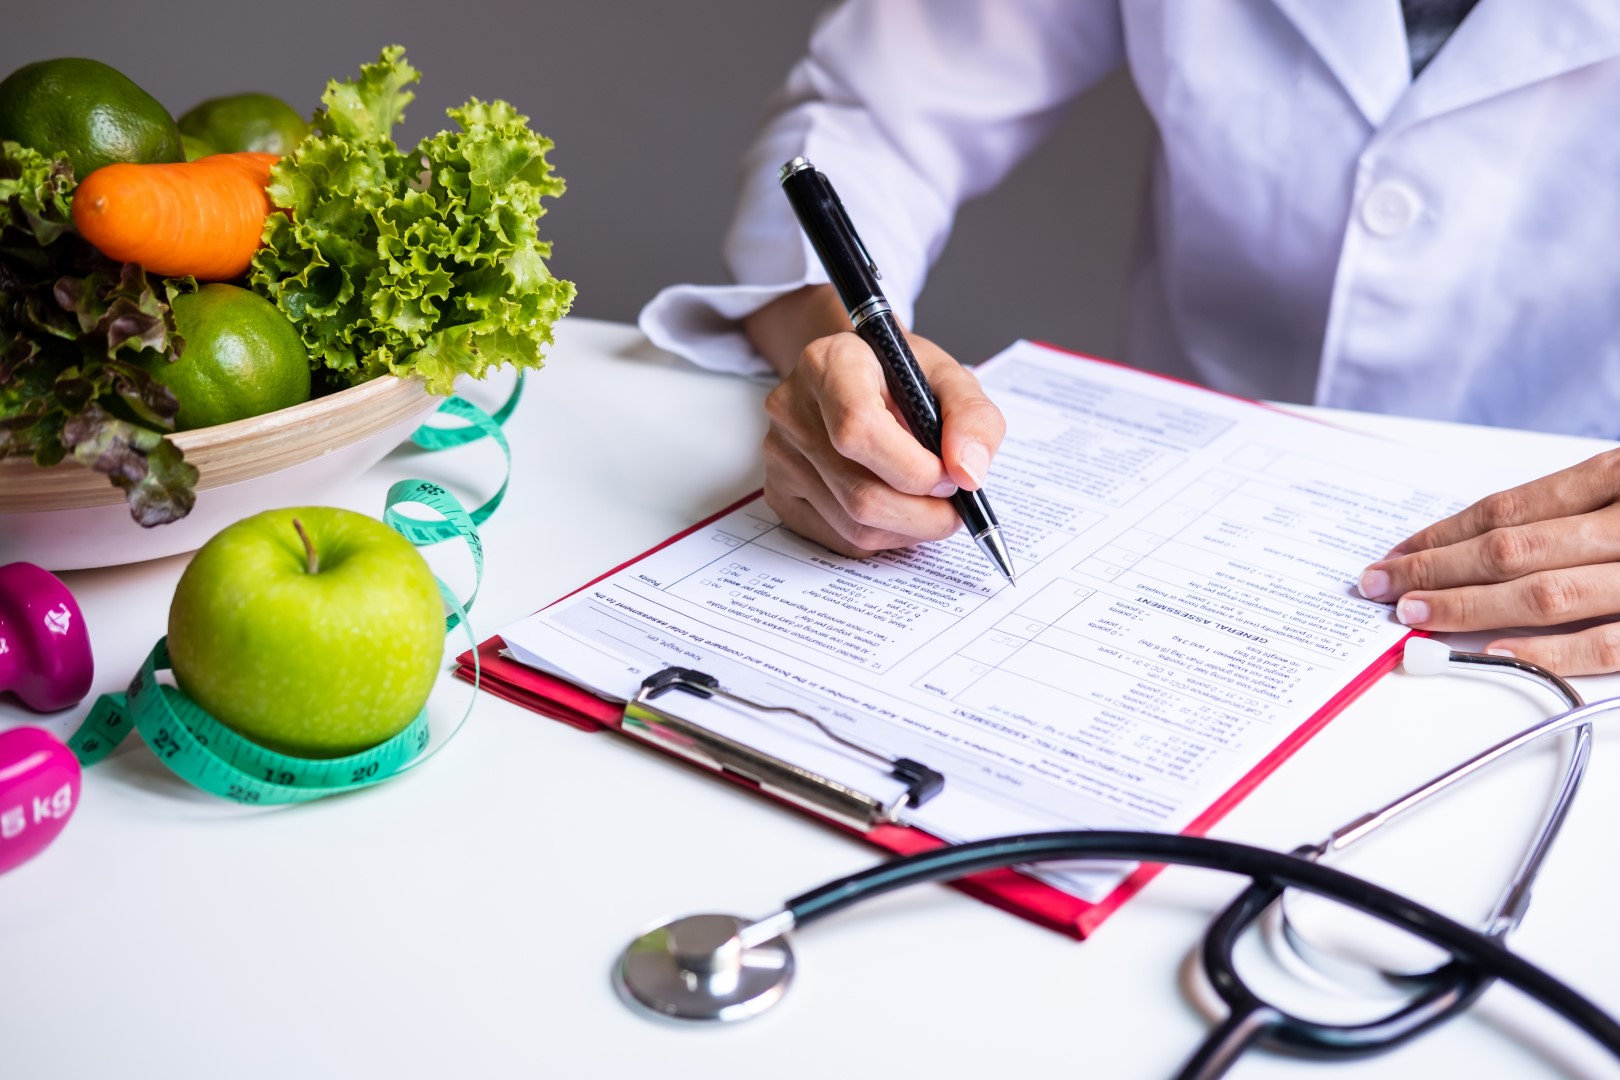 A Dietitian writing on a paper clipped to a board that’s placed on a table, the table has fruits, vegetables measuring tape on it.